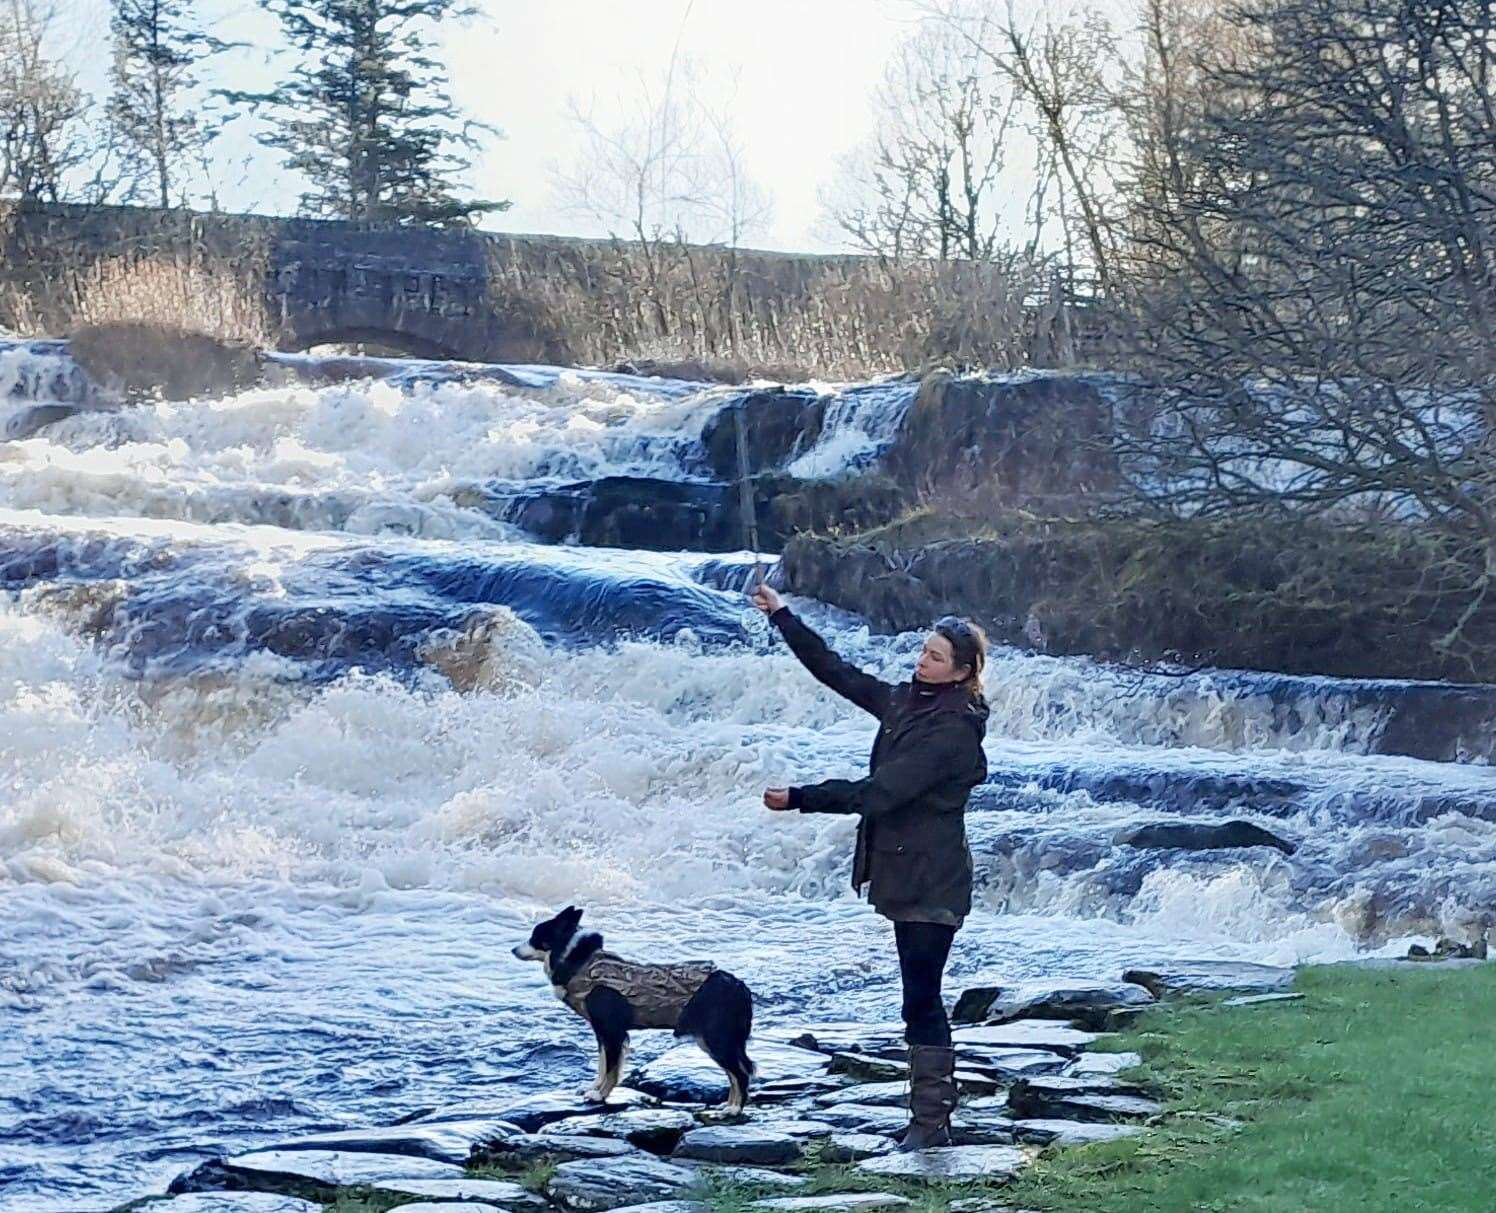 Morven Coghill making the first cast in the Falls Pool at Forss.